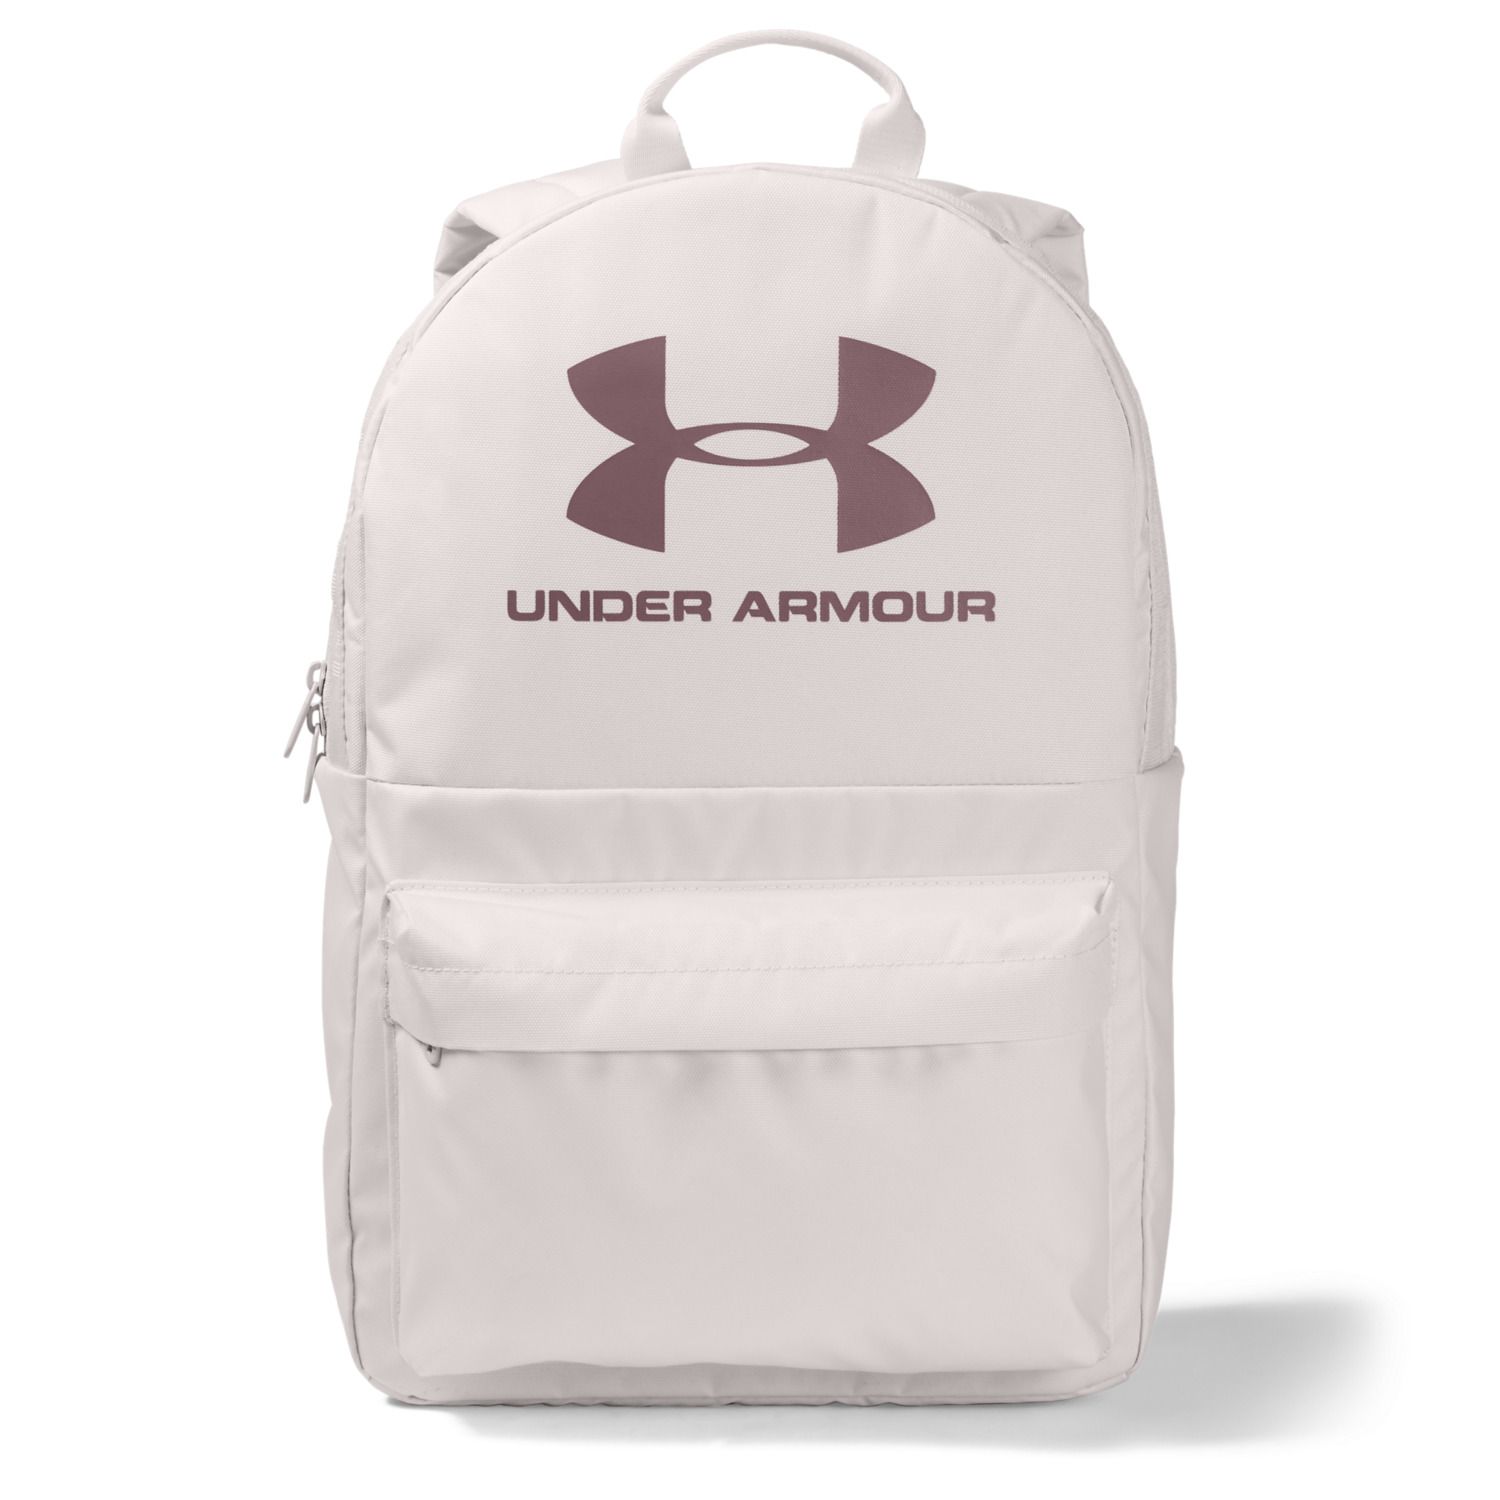 under armour neon backpack